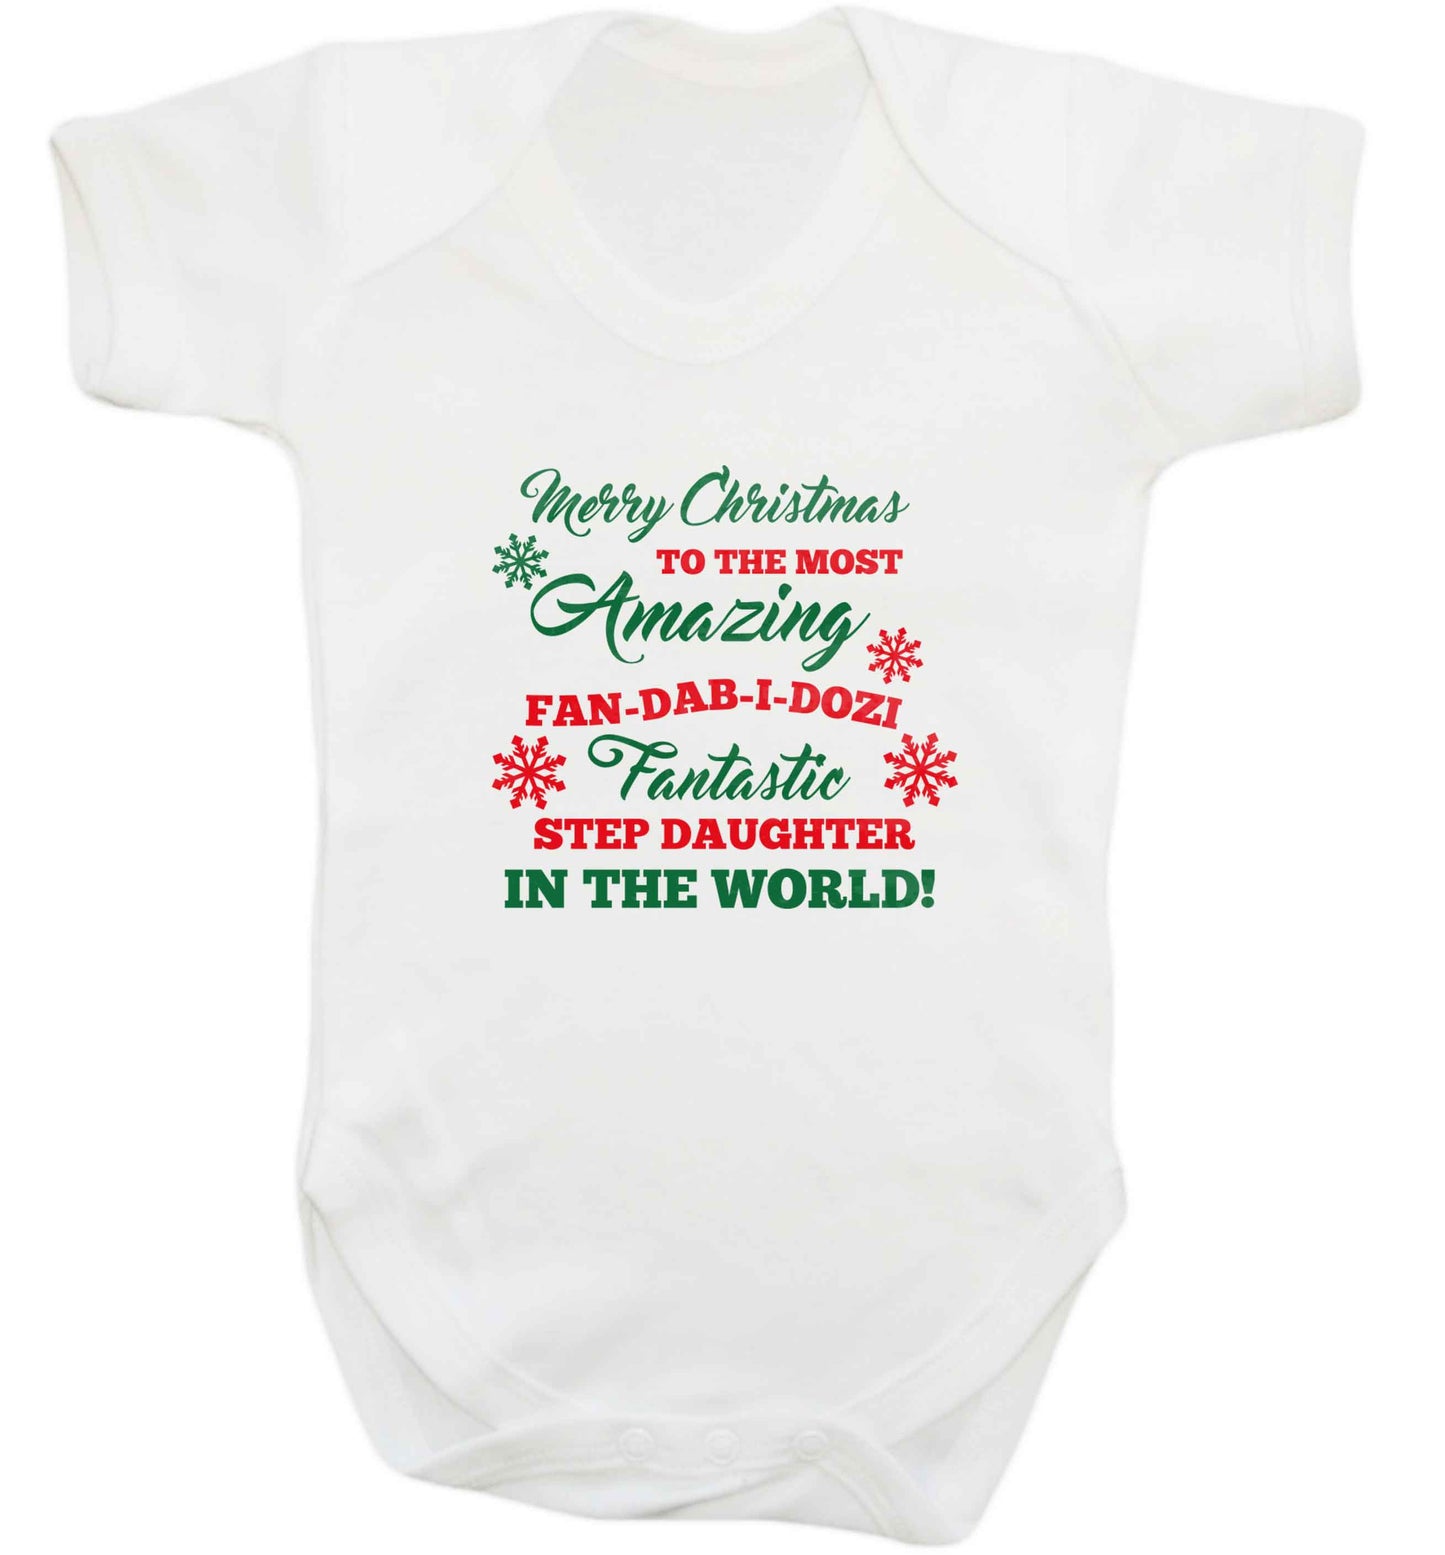 Merry Christmas to the most amazing fan-dab-i-dozi fantasic Step Daughter in the world baby vest white 18-24 months